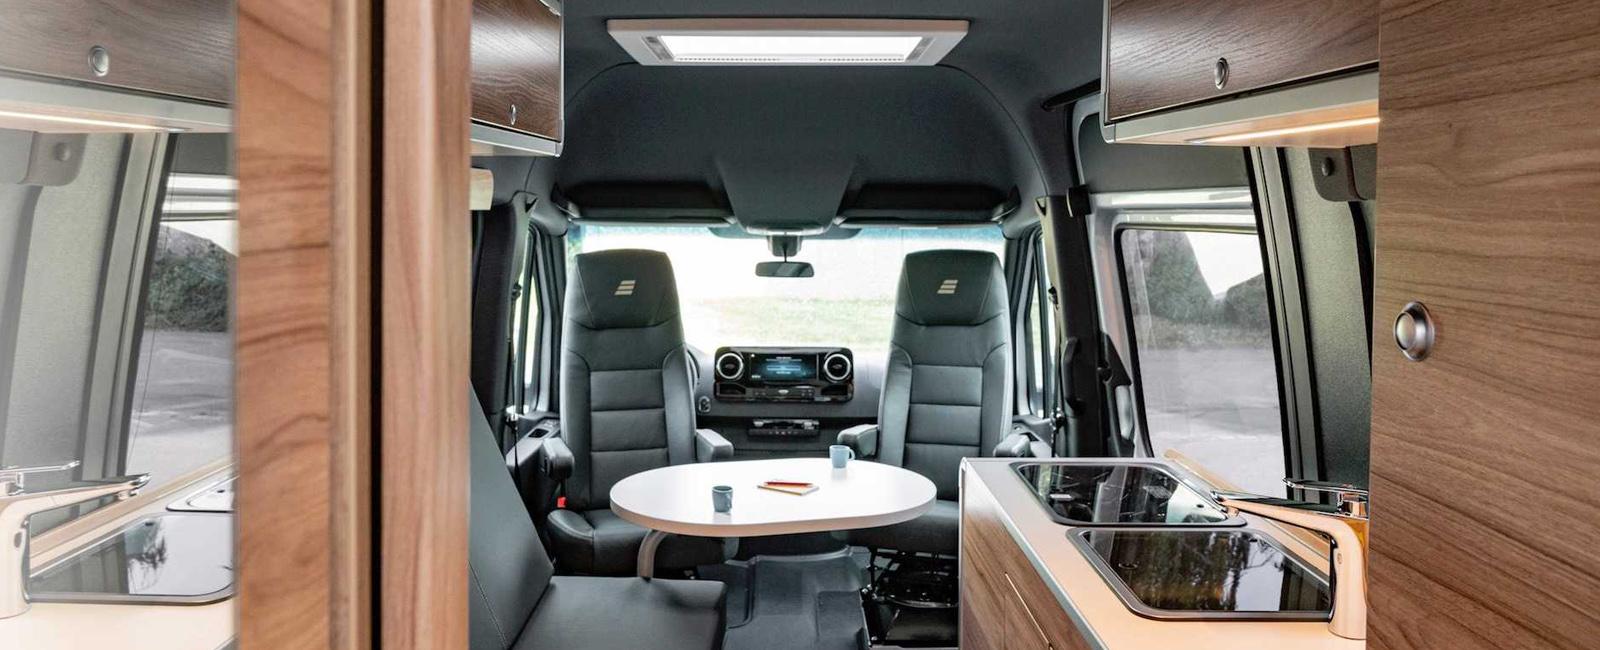 Hymer USA Launches To Bring Europe's Best RVs To The U.S. RVIA